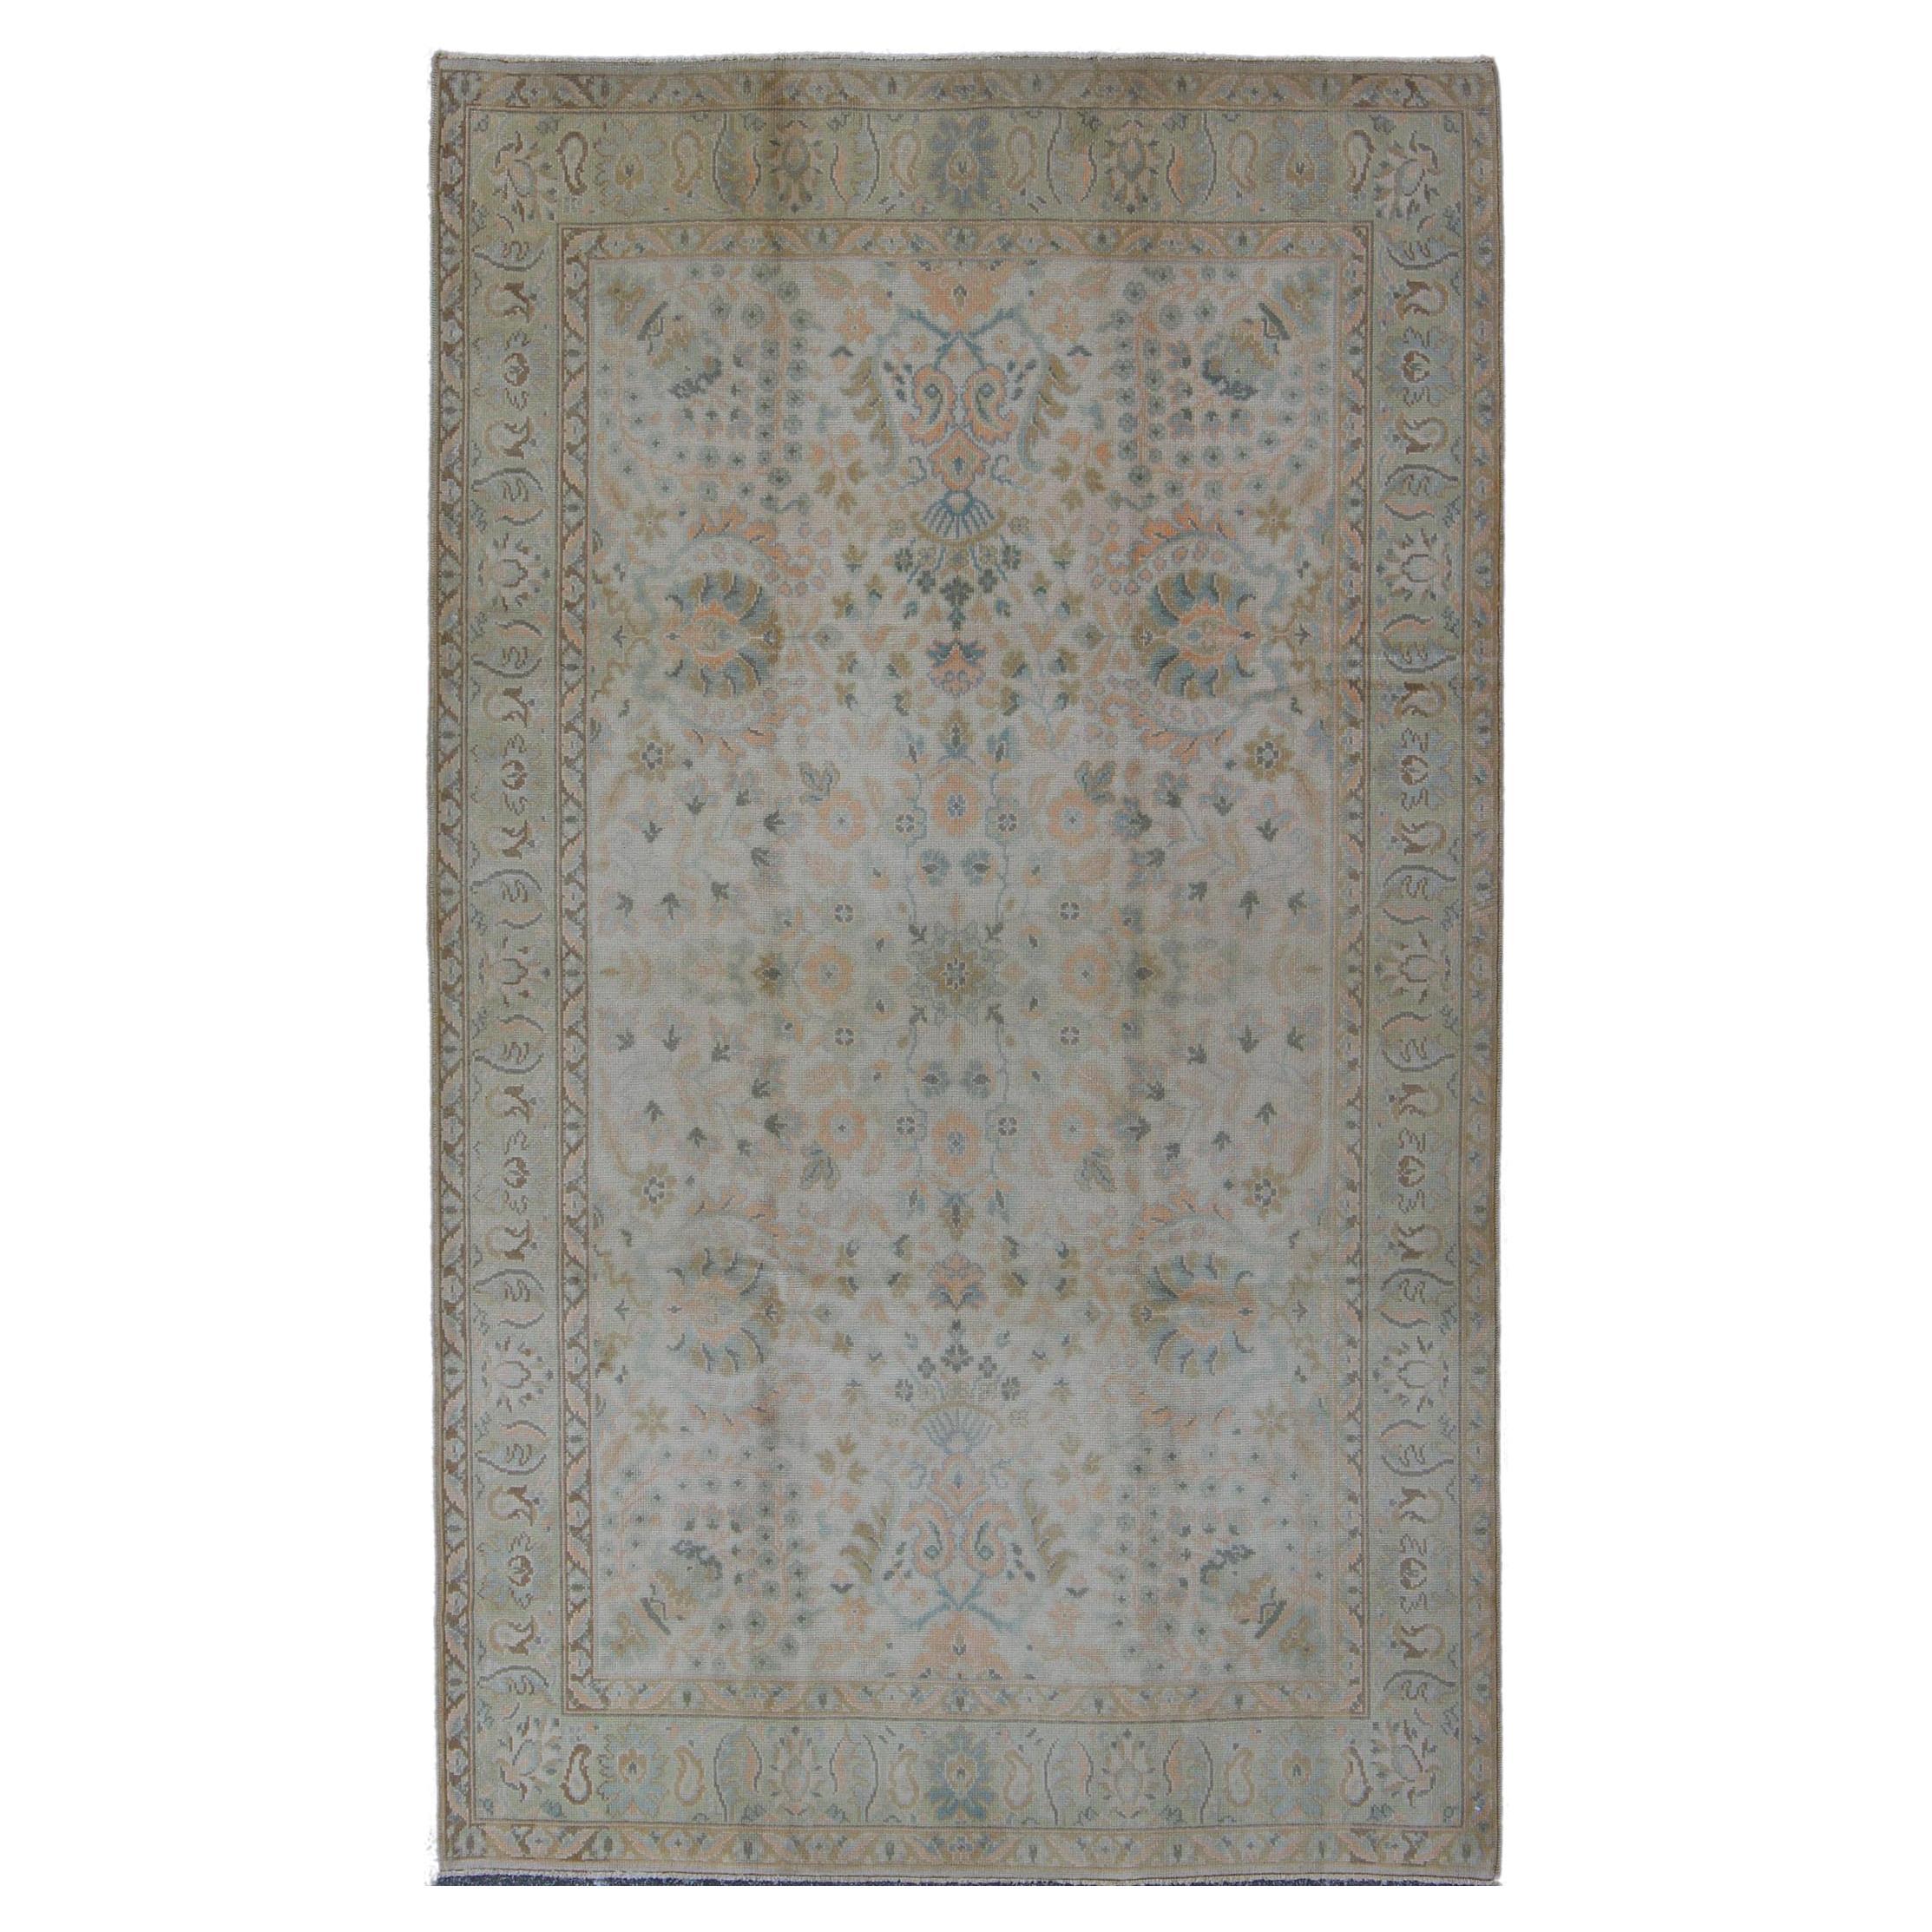 Neutral Vintage Turkish Oushak Rug with Floral Design and Repeated Floral Motifs For Sale